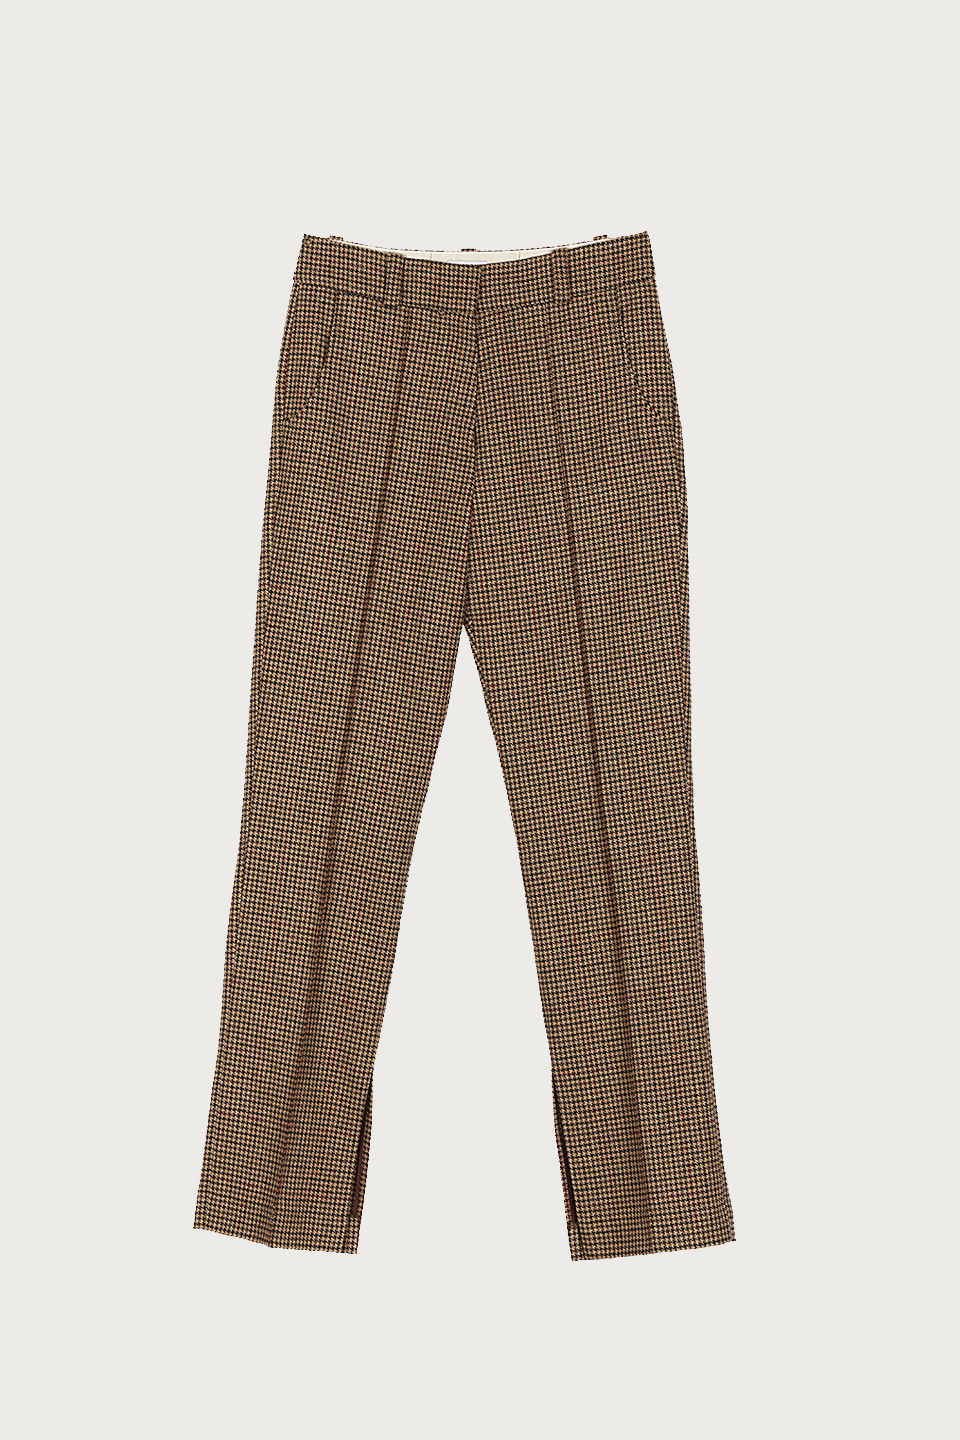 Valentine Gauthier - Reed Highland Pants in Recycled Wool